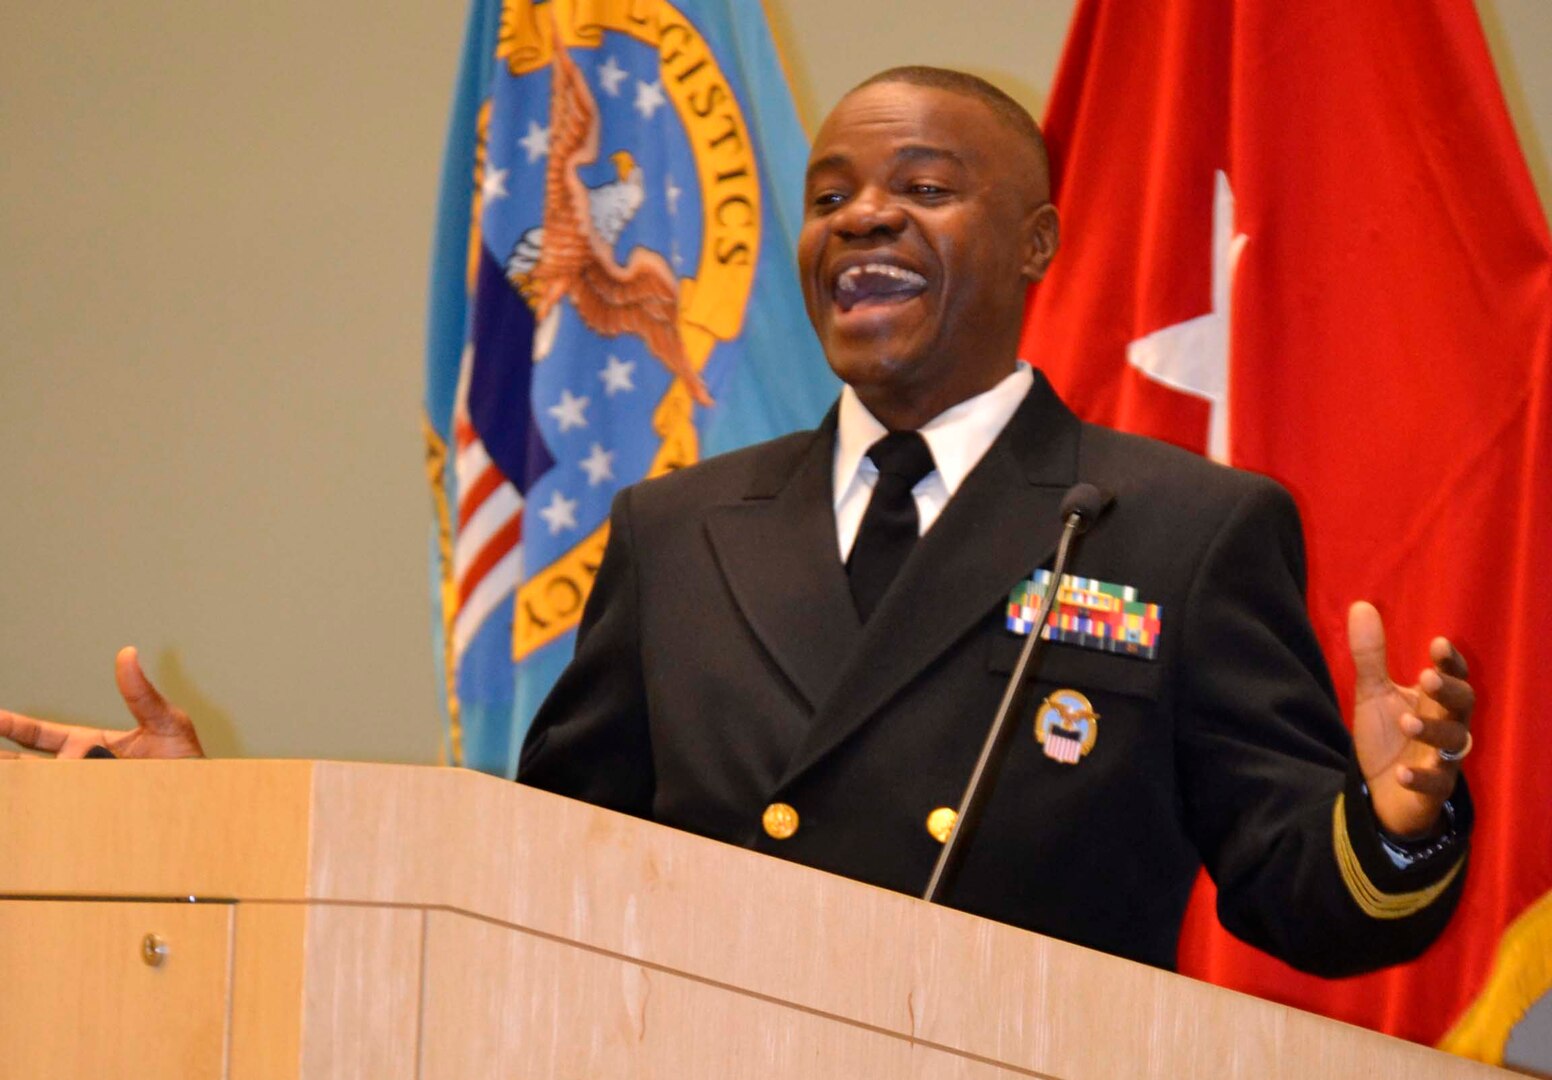 Navy Lt. Cmdr. Prince Tailey, Customer Electronic Catalogue/Medical Surgical Operations Center branch chief in DLA Troop Support’s Medical supply chain, thanks his friends, family and coworkers during a promotion ceremony in his honor November 22, 2019, in Philadelphia.